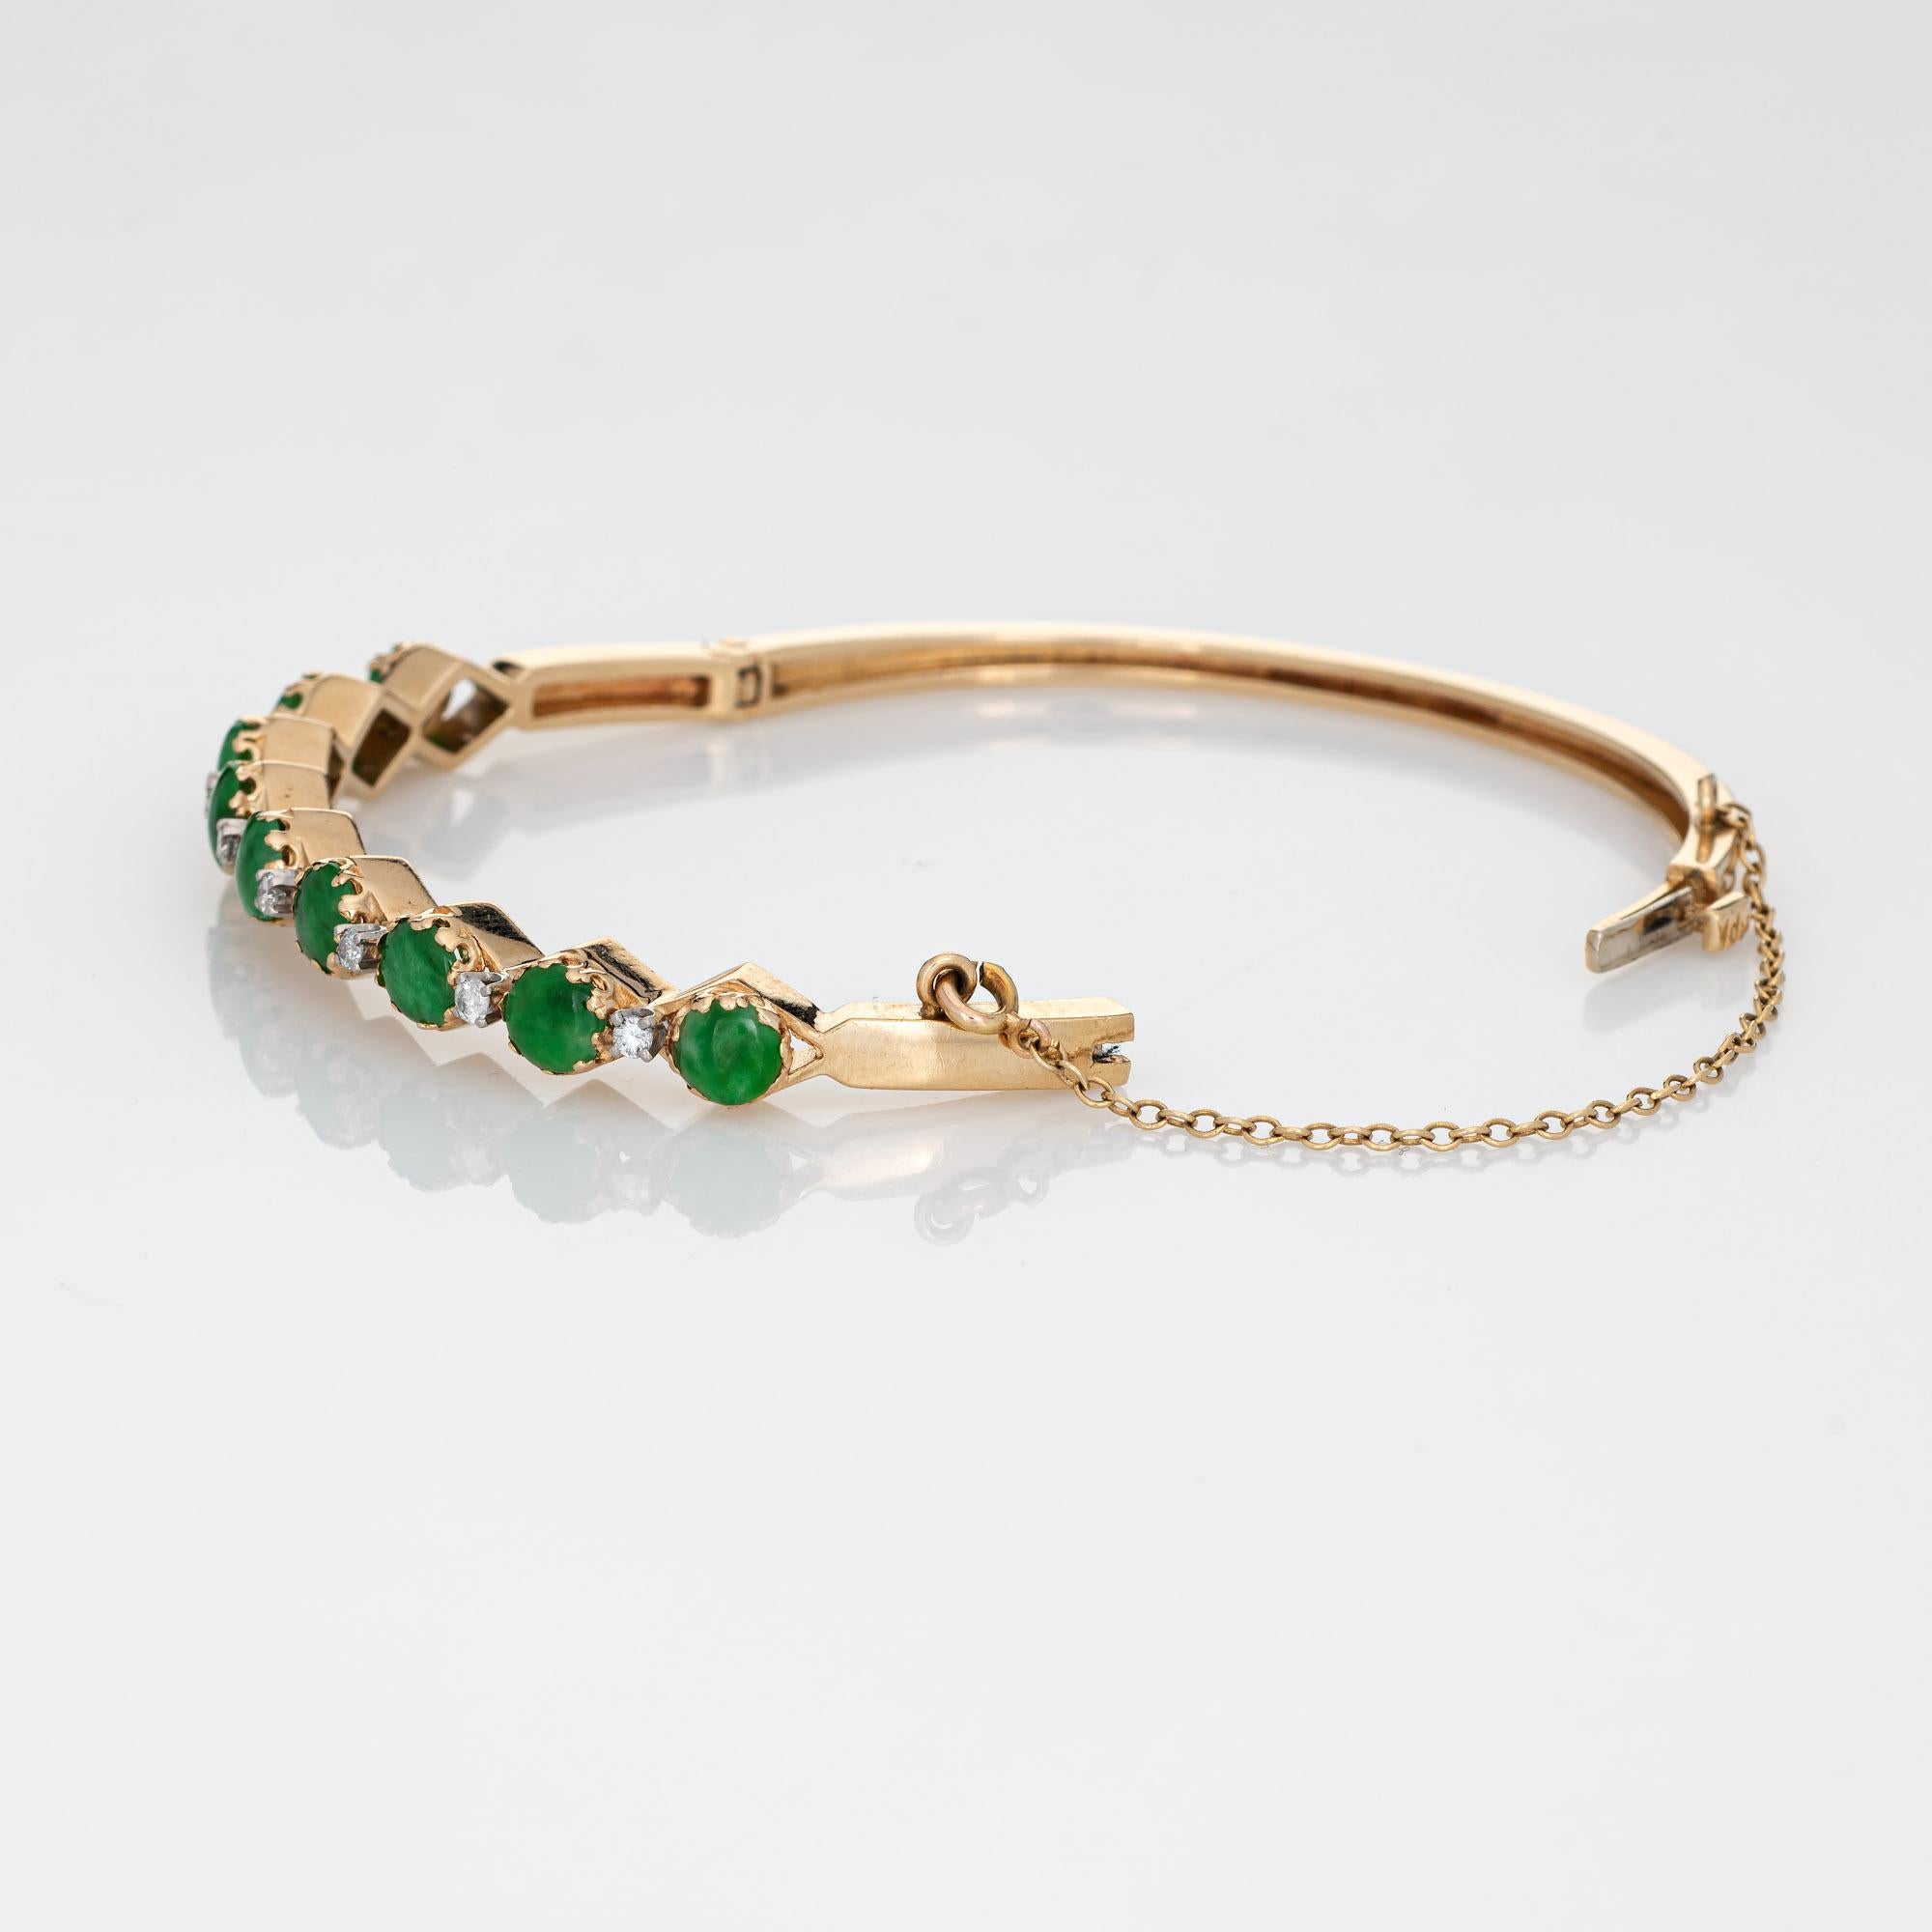 Stylish and finely detailed vintage jade & diamond bangle bracelet crafted in 14 karat yellow gold (circa 1970s to 1980s). 

Nine cabochon cut pieces of jade measure 5mm each. A total of 8 diamonds are estimated at 0.03 carats each (0.24 carats